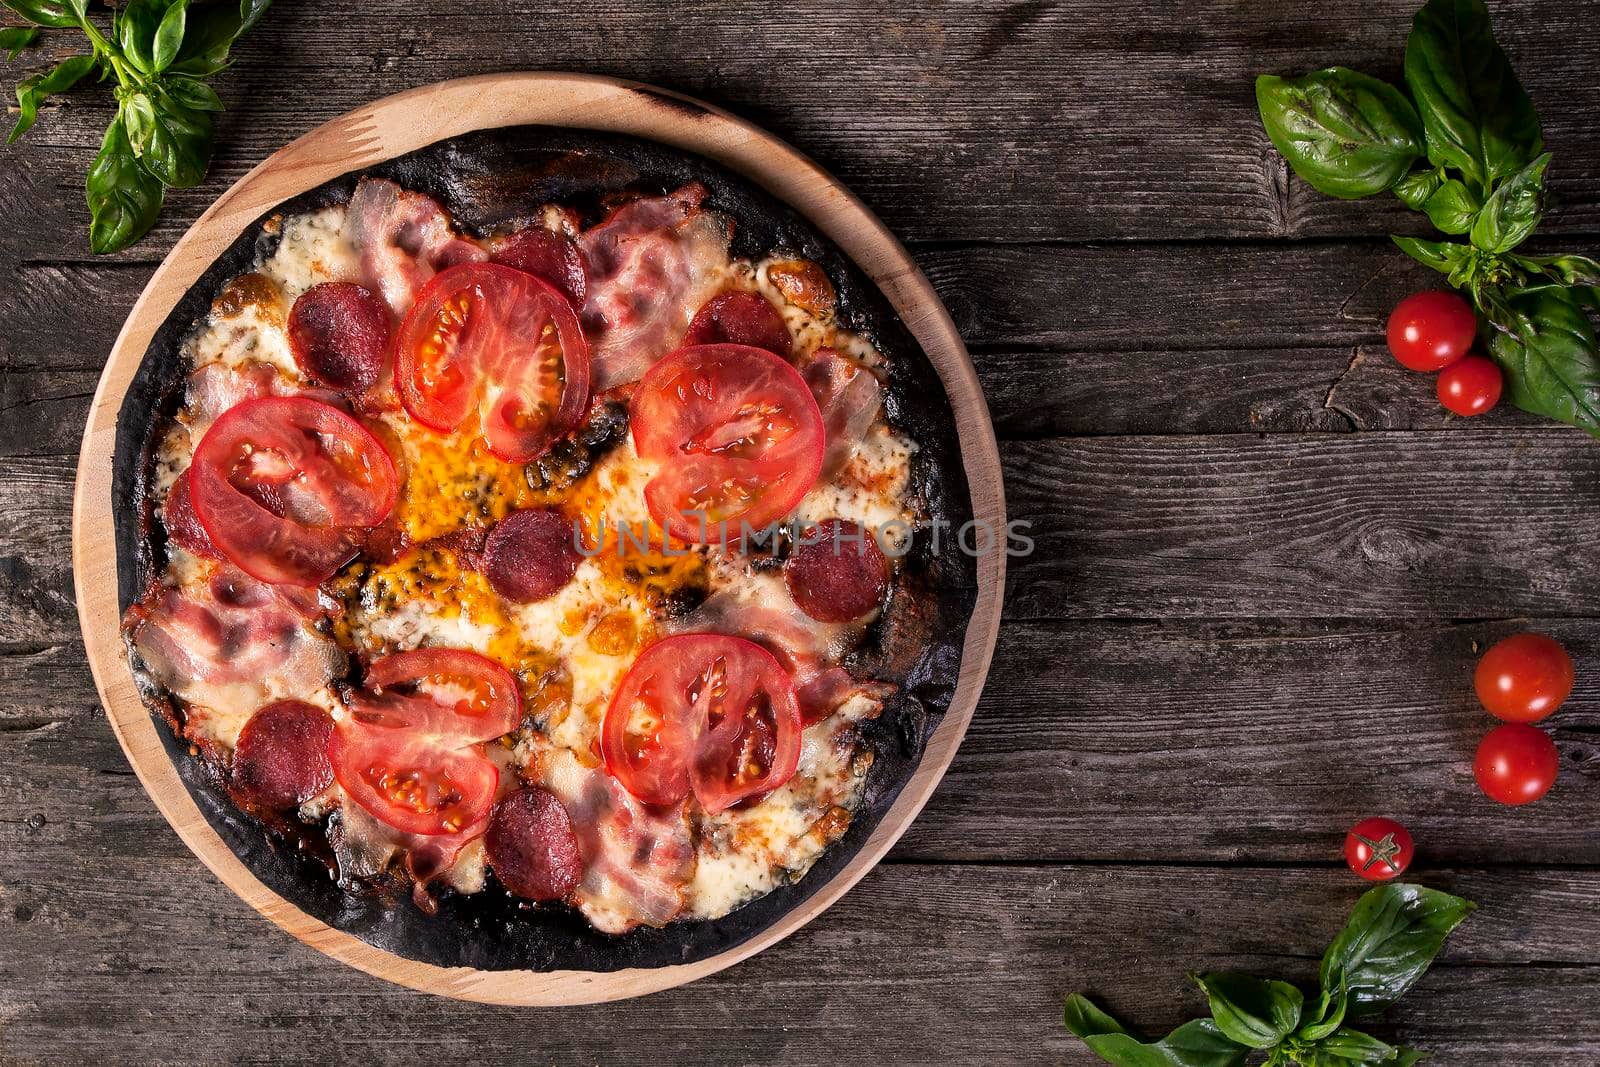 Black pizza with salami, ham, tomato and cheese by Jyliana